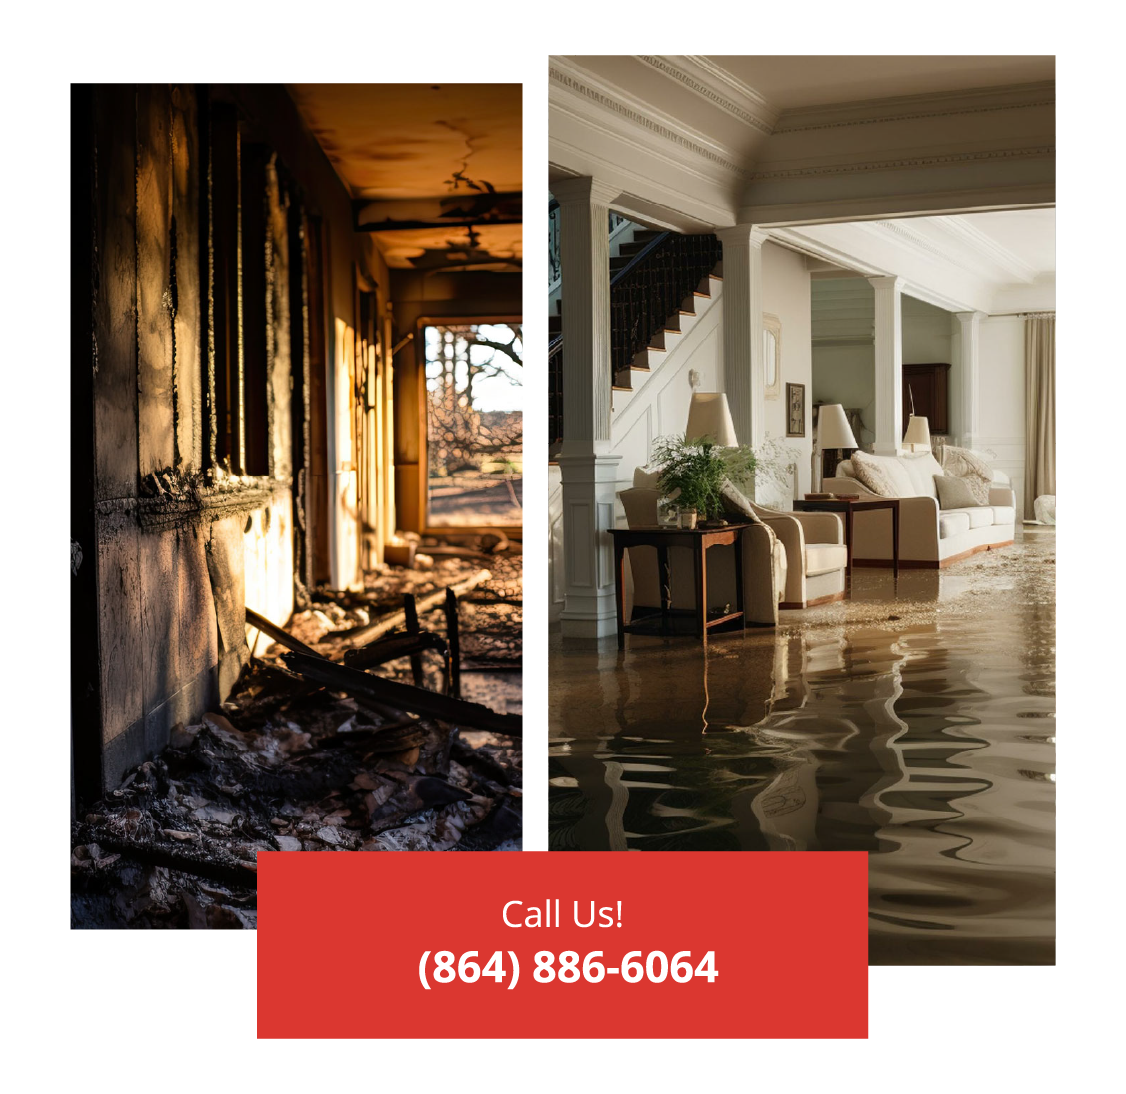 Fire damage and water damage